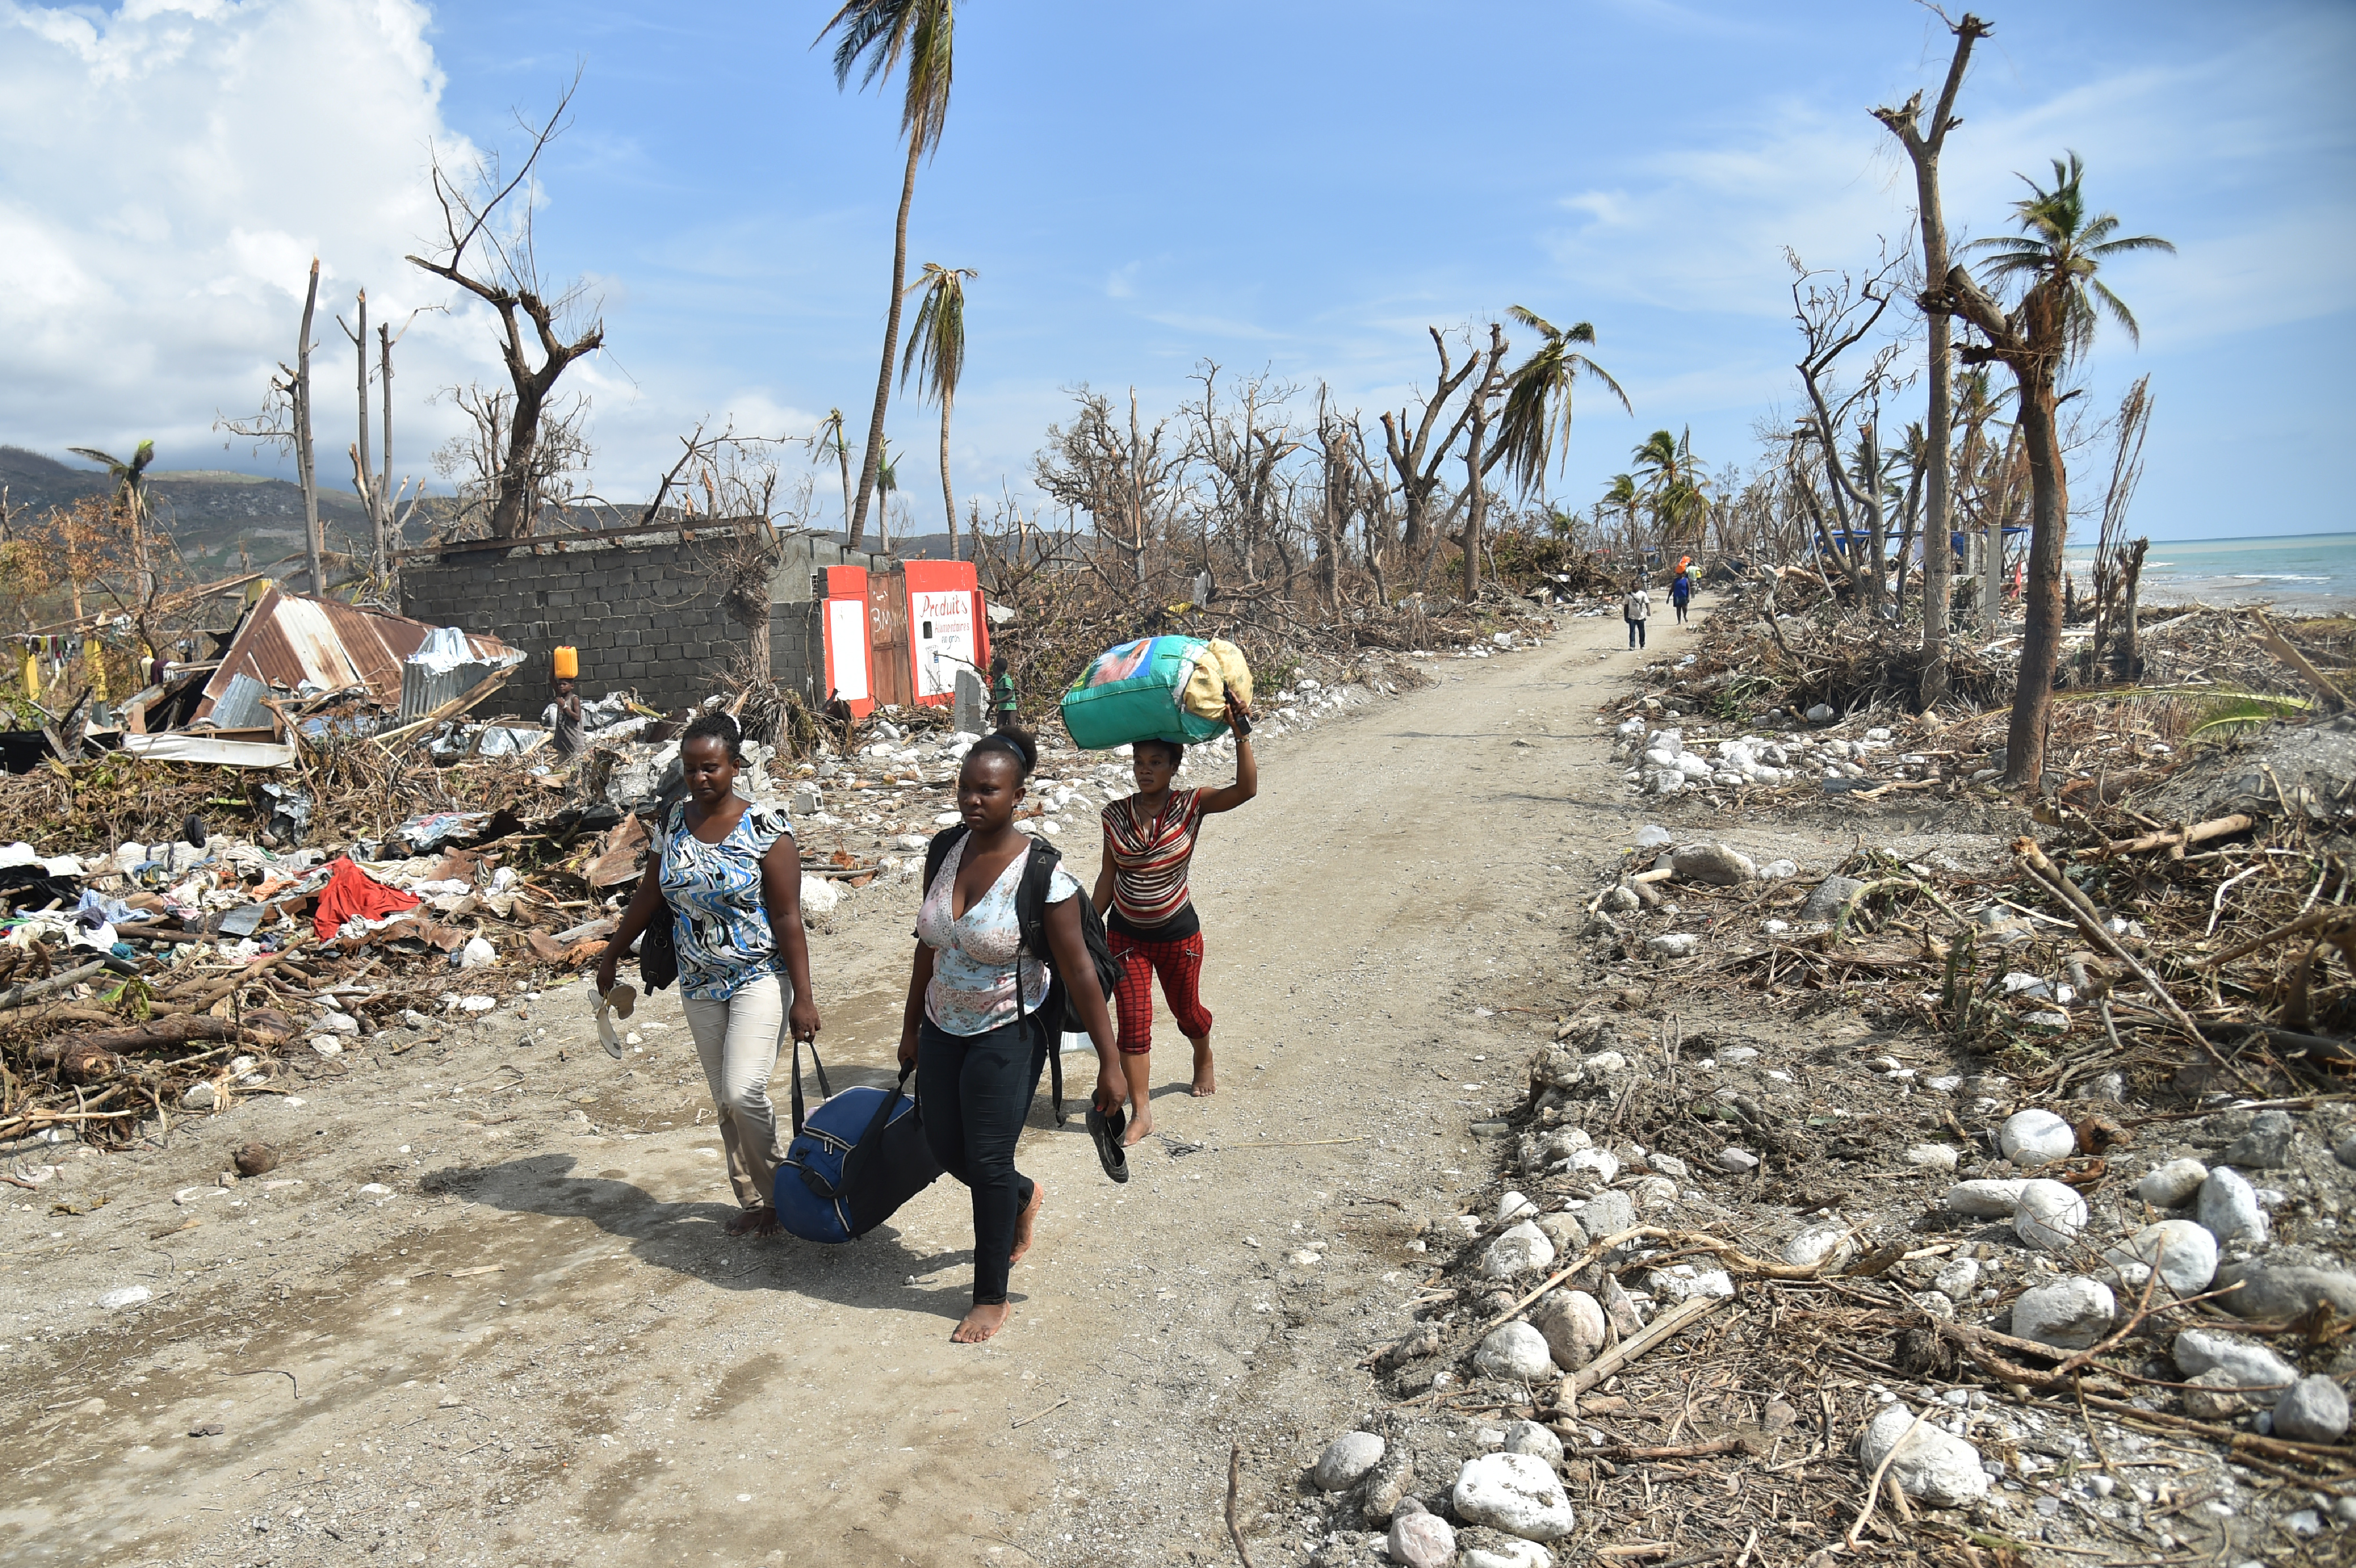 People walk in a street of Les Cayes, Haiti on October 10, 2016, following the passage of Hurricane Matthew.  Haiti faces a humanitarian crisis that requires a "massive response" from the international community, the United Nations chief said , with at least 1.4 million people needing emergency aid following last week's battering by Hurricane Matthew. / AFP PHOTO / HECTOR RETAMAL